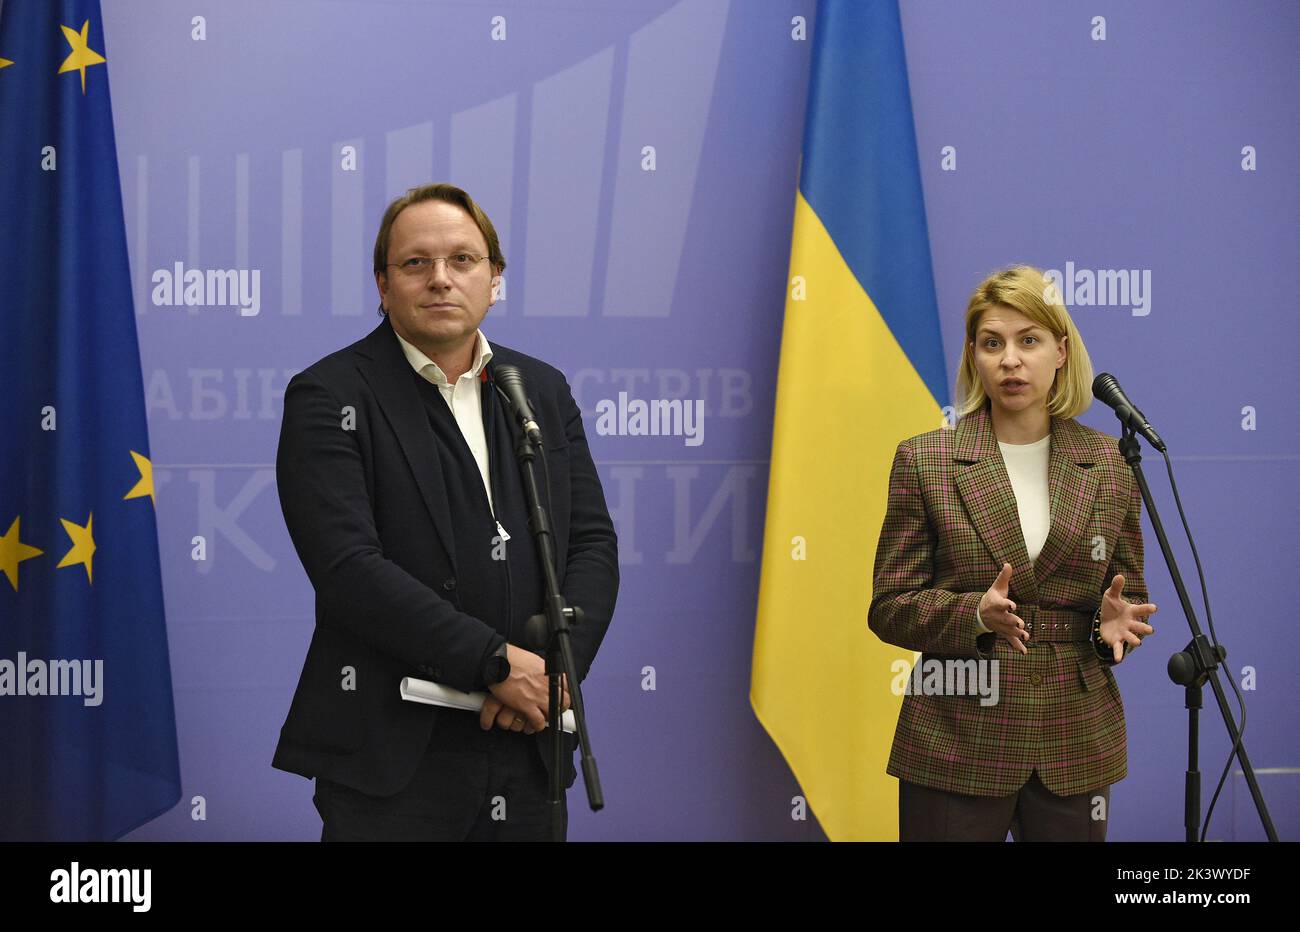 Kyiv, Ukraine. 28th Sep, 2022. KYIV, UKRAINE - SEPTEMBER 28, 2022 - Deputy Prime Minister for European and Euro-Atlantic Integration of Ukraine Olha Stefanishyna and European Commissioner for Neighbourhood and Enlargement from Hungary Oliver Varhelyi hold a joint press briefing during their official meeting, Kyiv, capital of Ukraine. Credit: Ukrinform/Alamy Live News Stock Photo